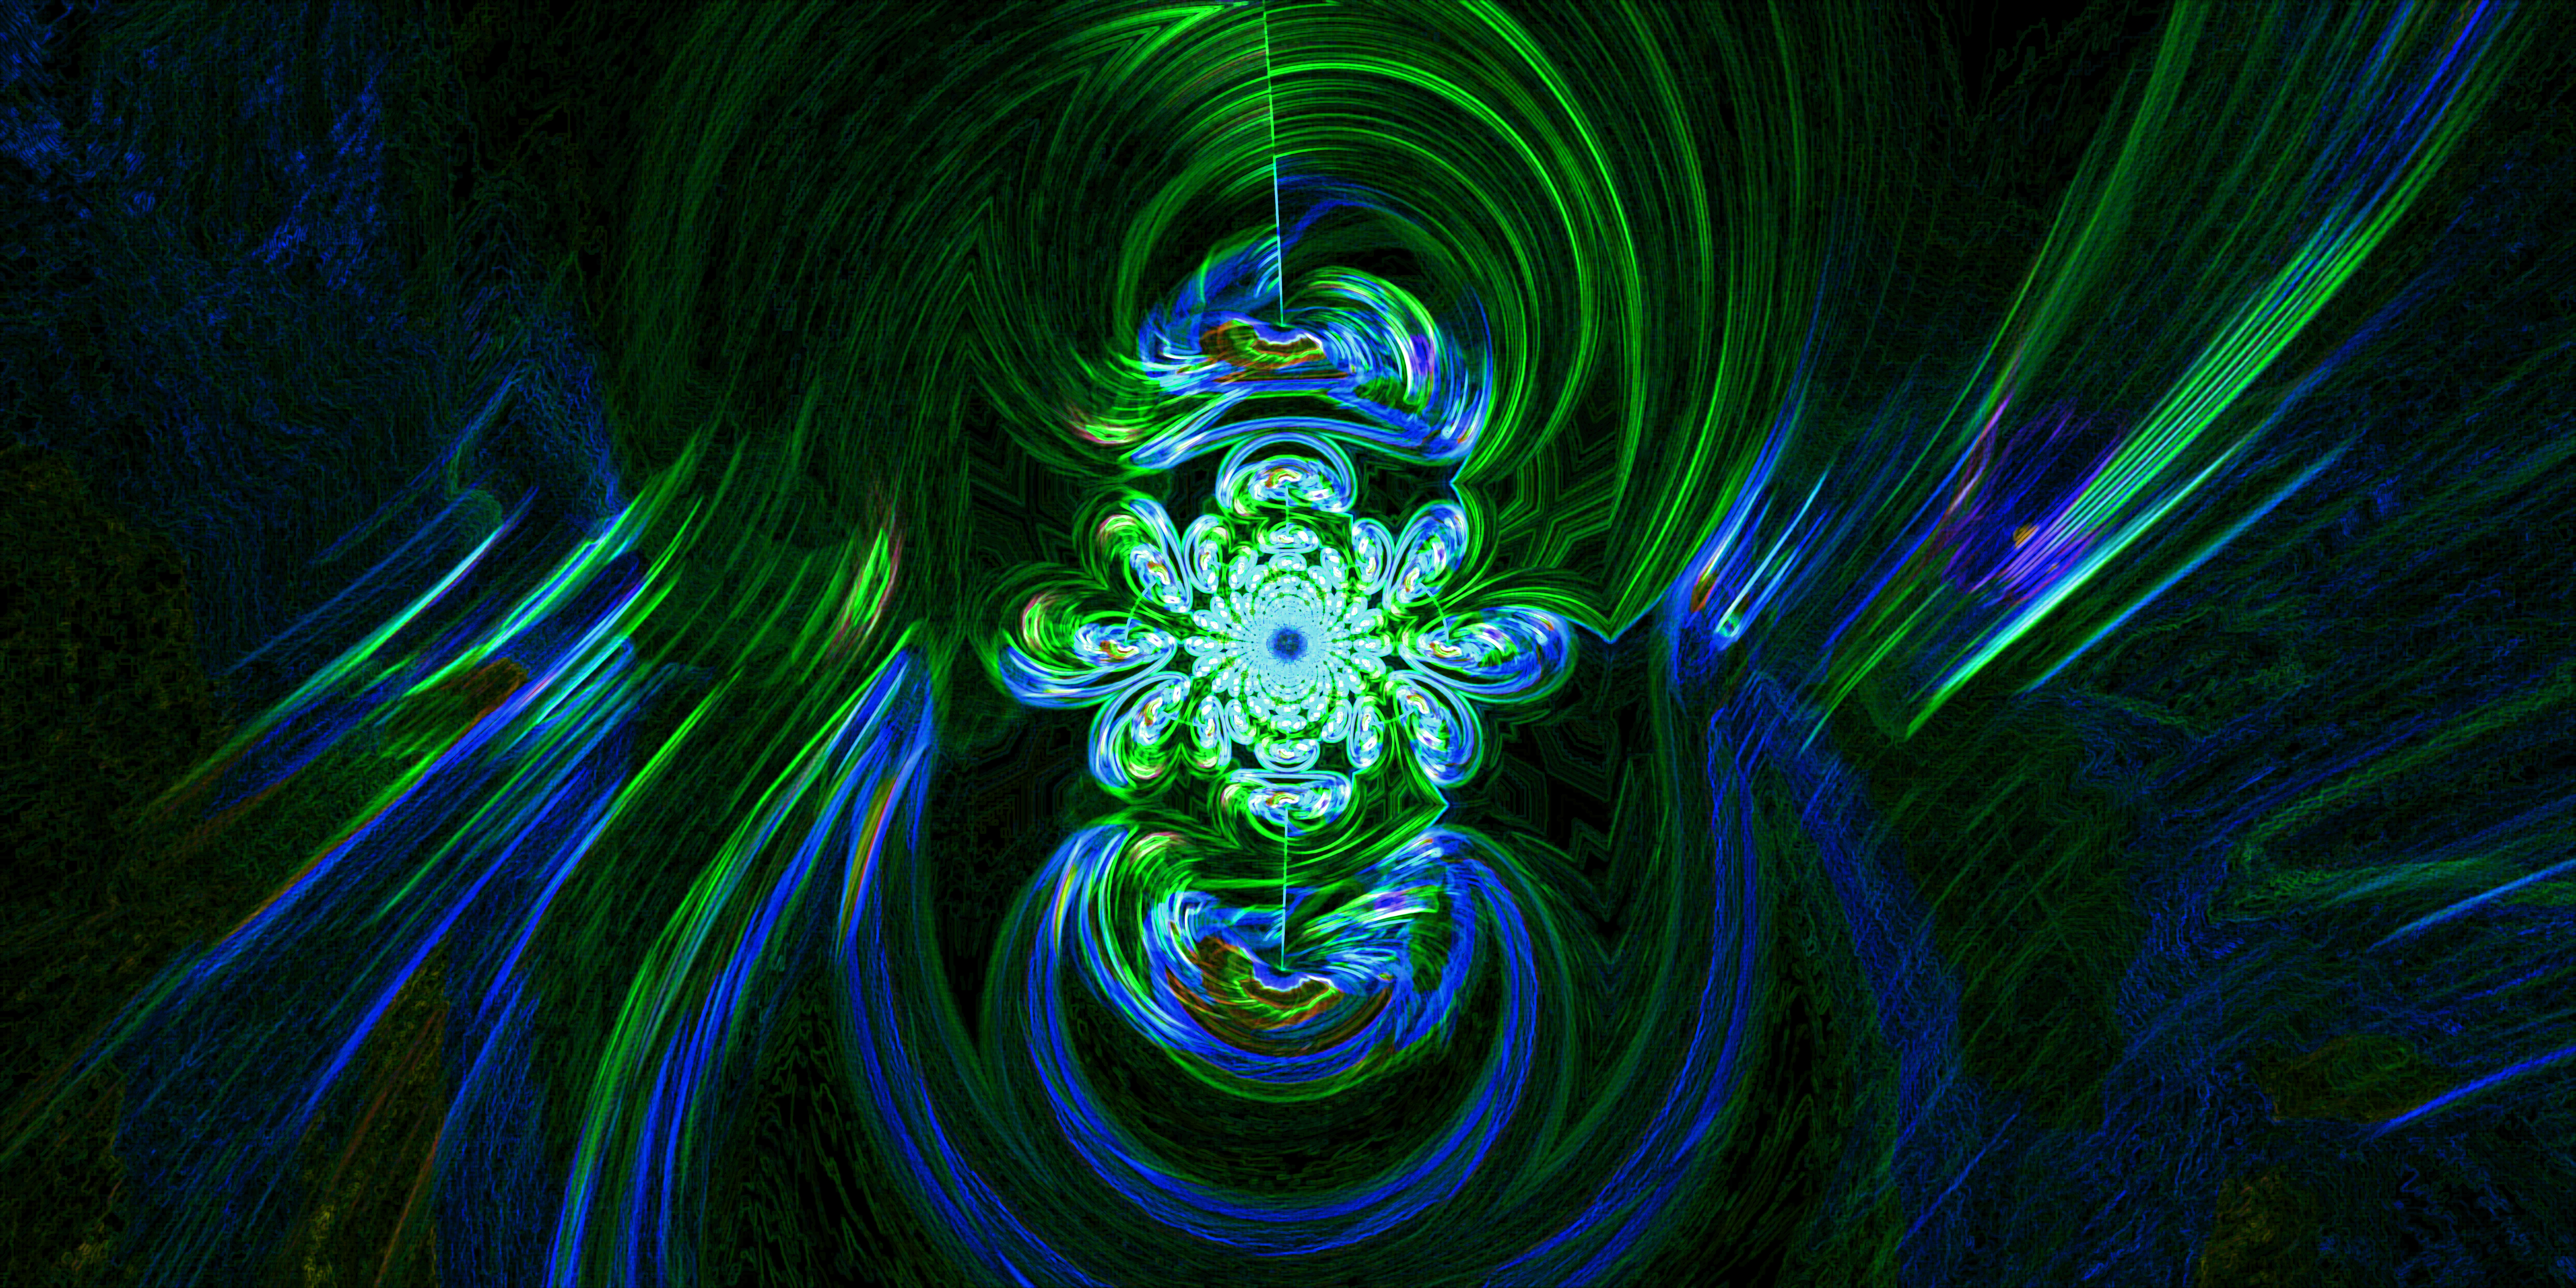 Abstract/Fractal 195 by StationAperture on DeviantArt